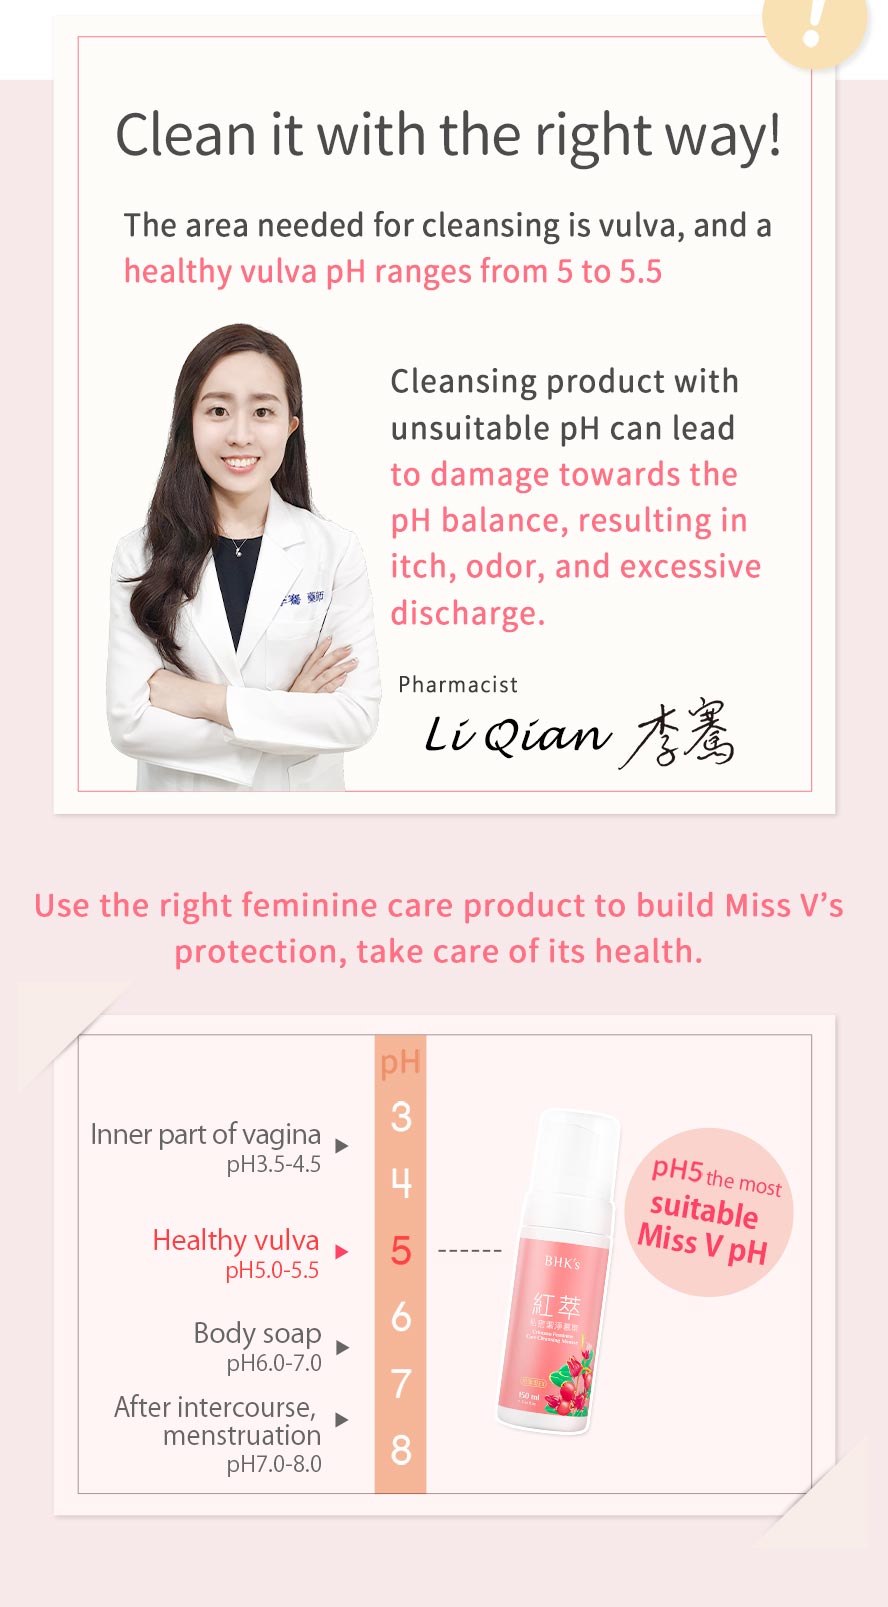 Maintaining the pH balance of the vagina is essential for woman's health, use BHK feminine care cleansing mousse that is highly recommended by pharmacists